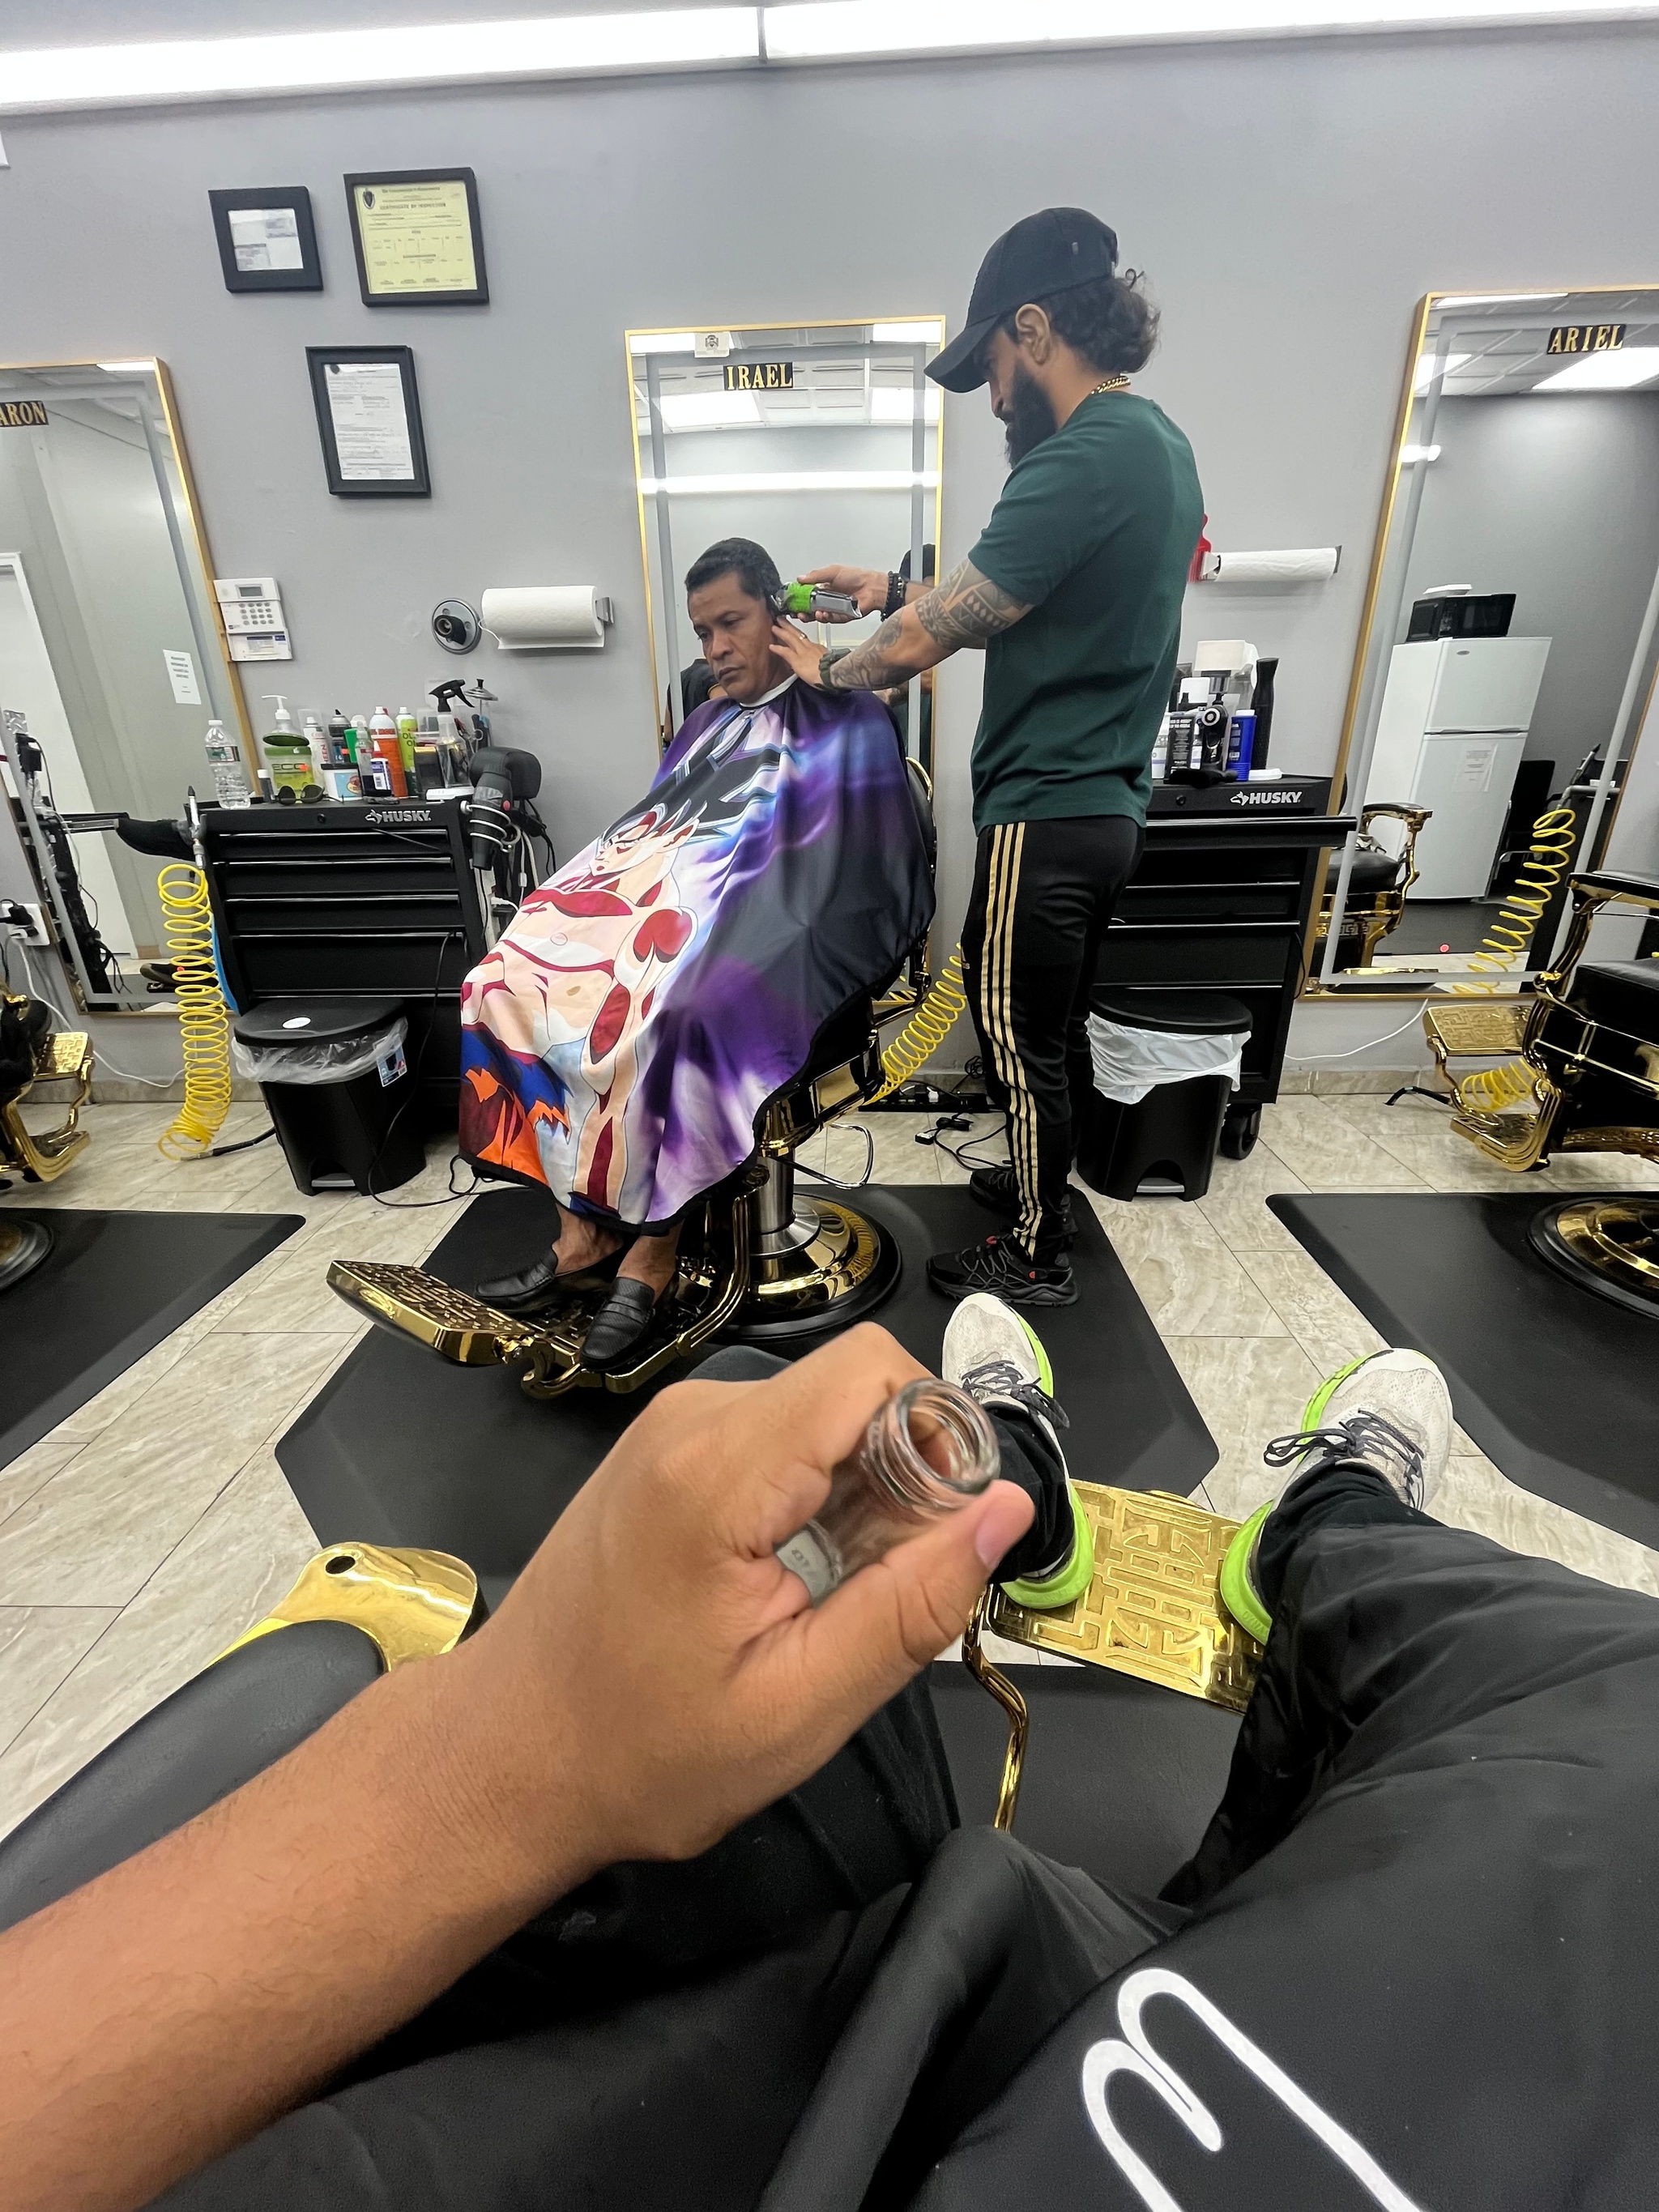 A scene in a barbershop taken by someone sitting in a chair across from a barber cutting the hair of a client. At the bottom of the image the photographer's hand protrudes into the image. The photographer, artist Bryan Fernandez, has light brown skin. 